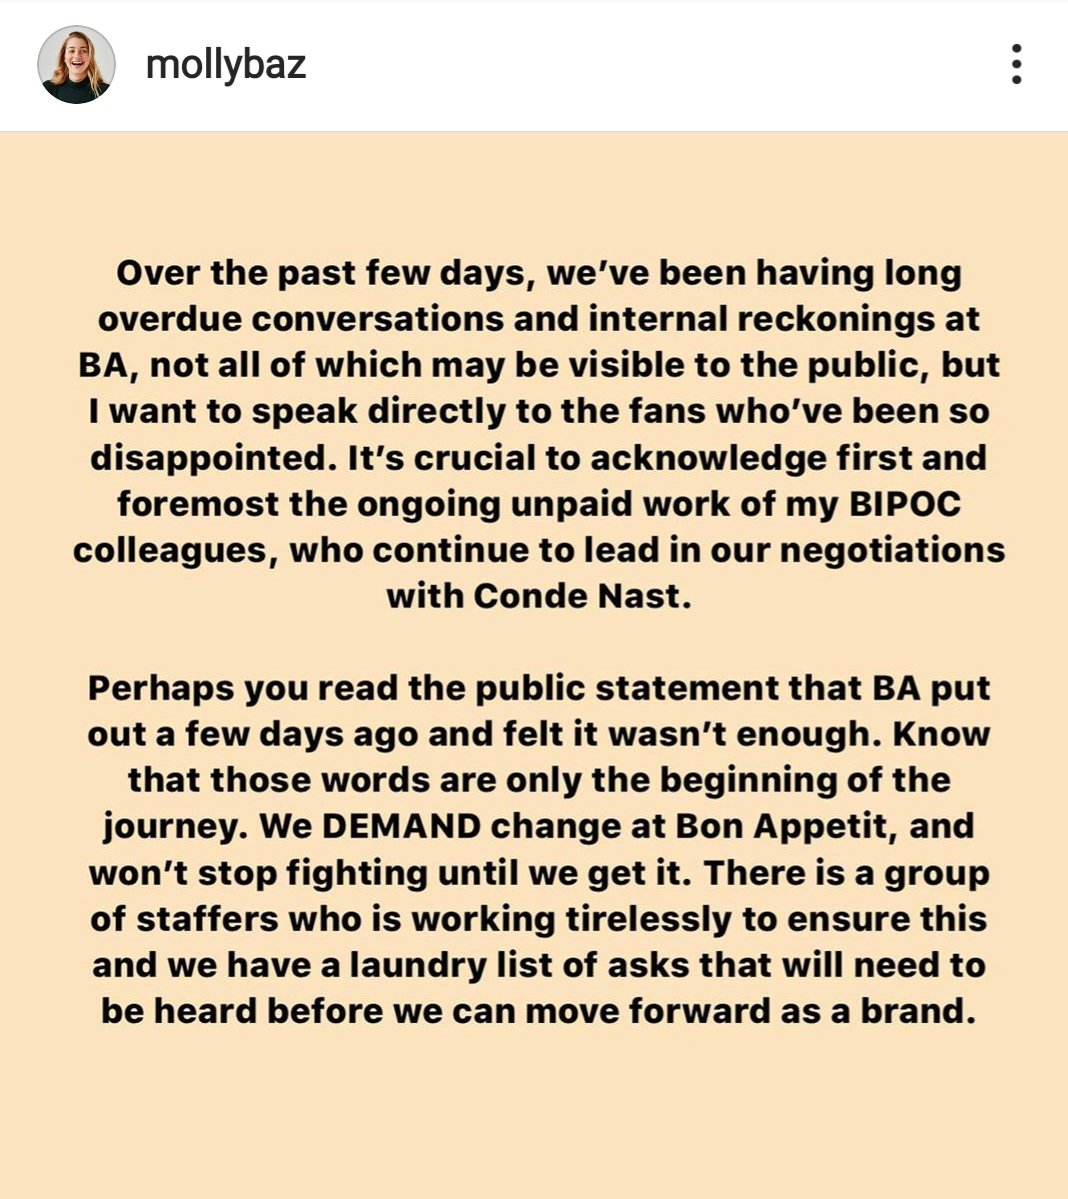 The Molly Baz Apology (from her instagram)